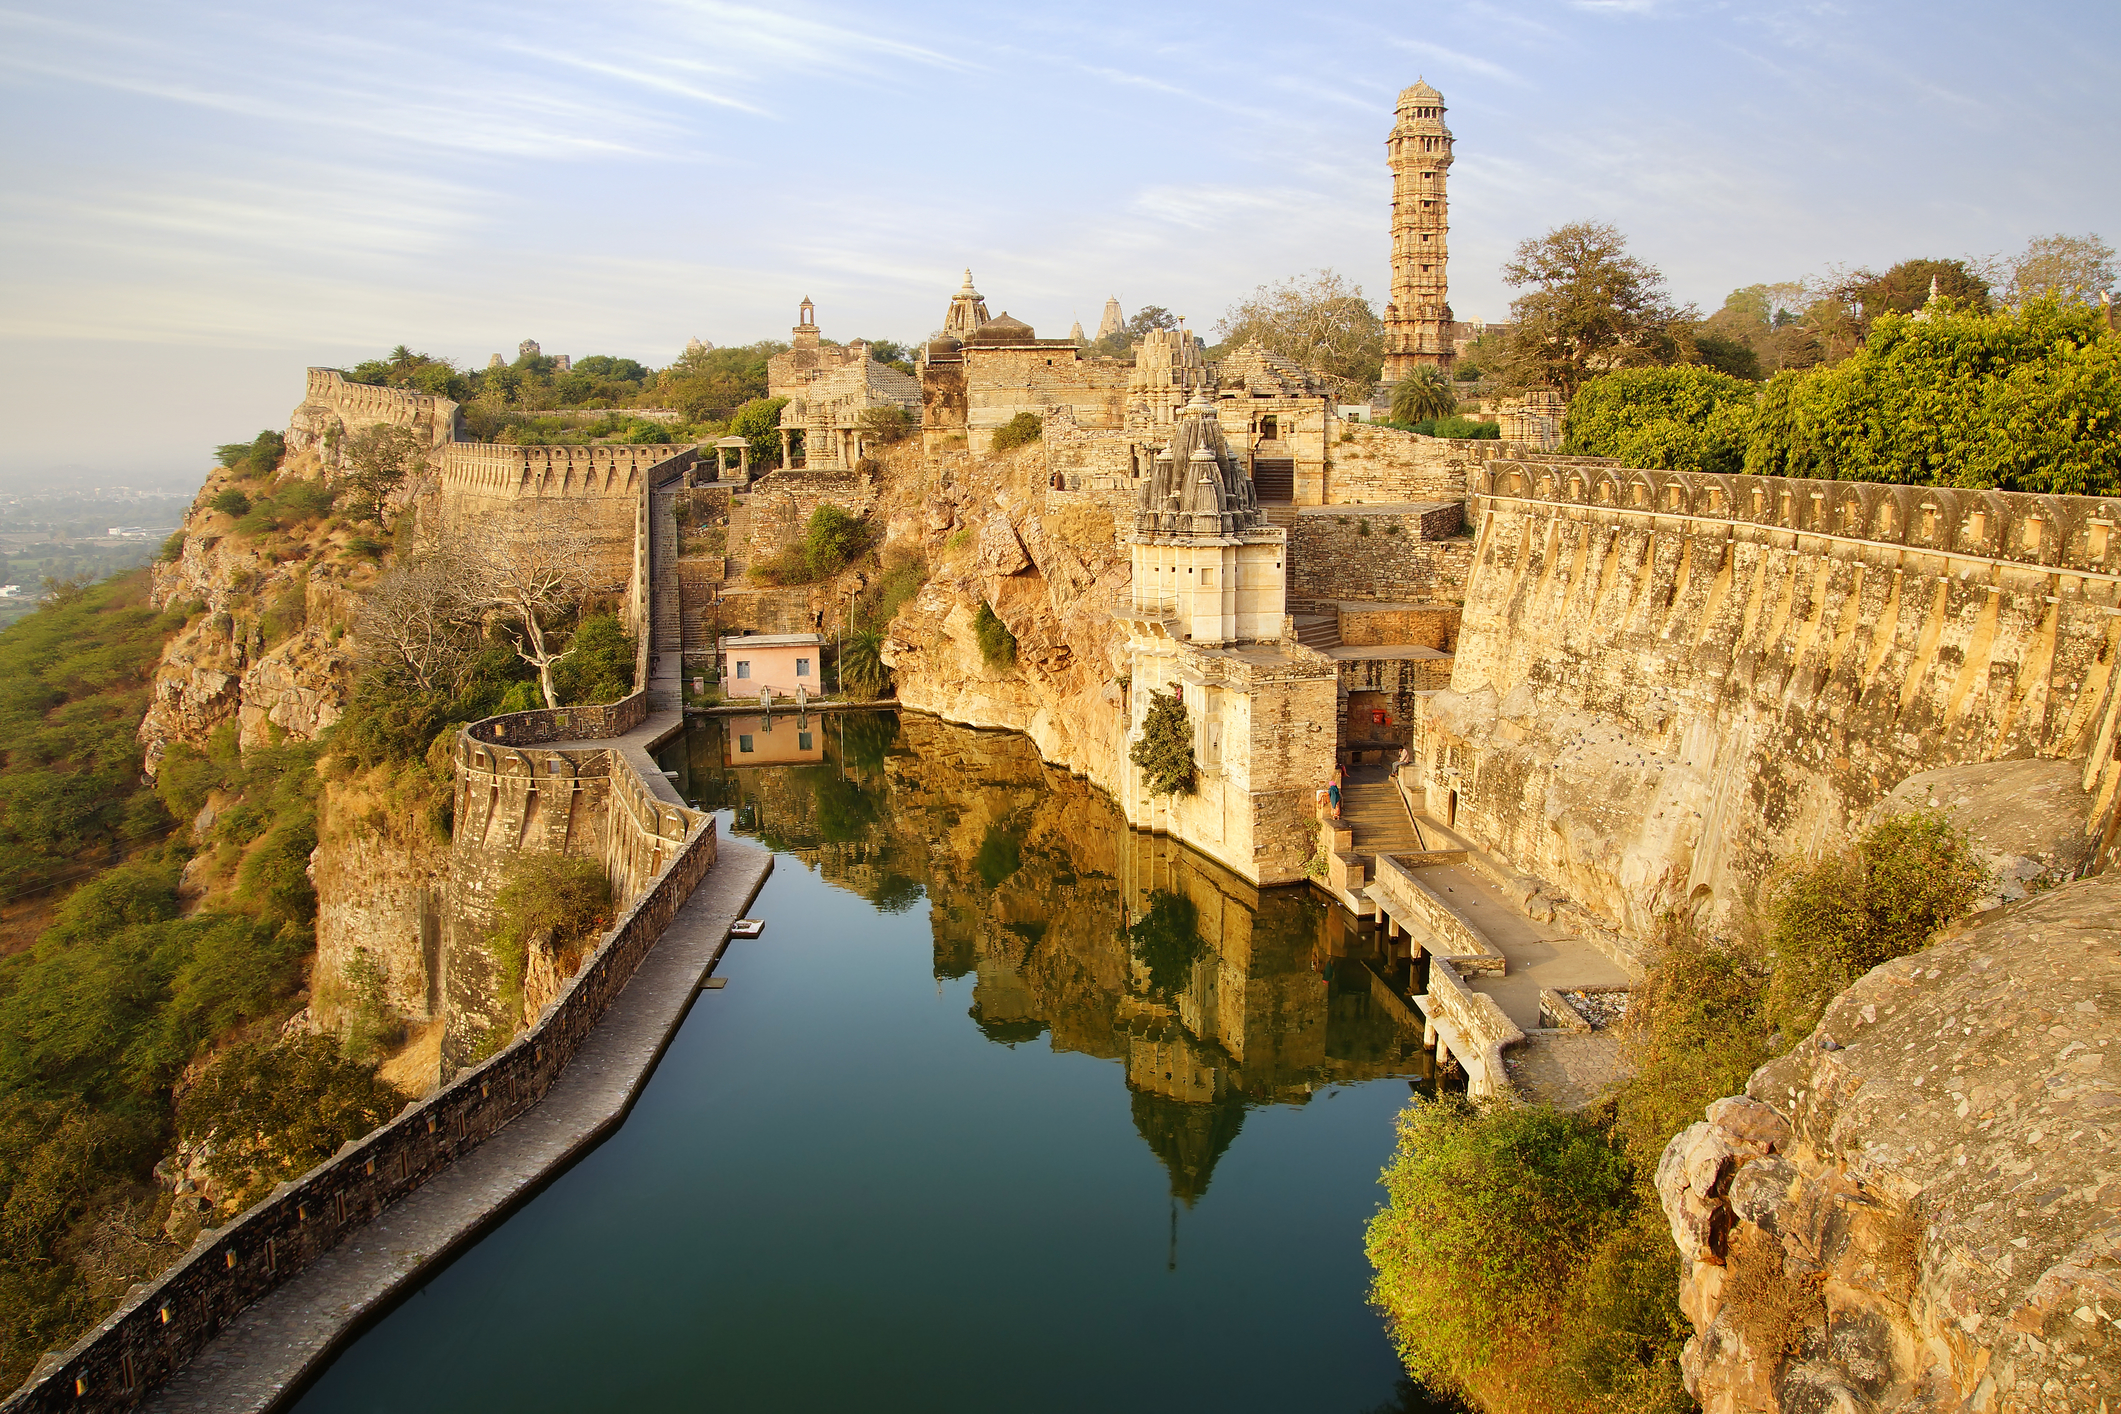 Cittorgarh Fort, India (Wild Frontiers/PA)